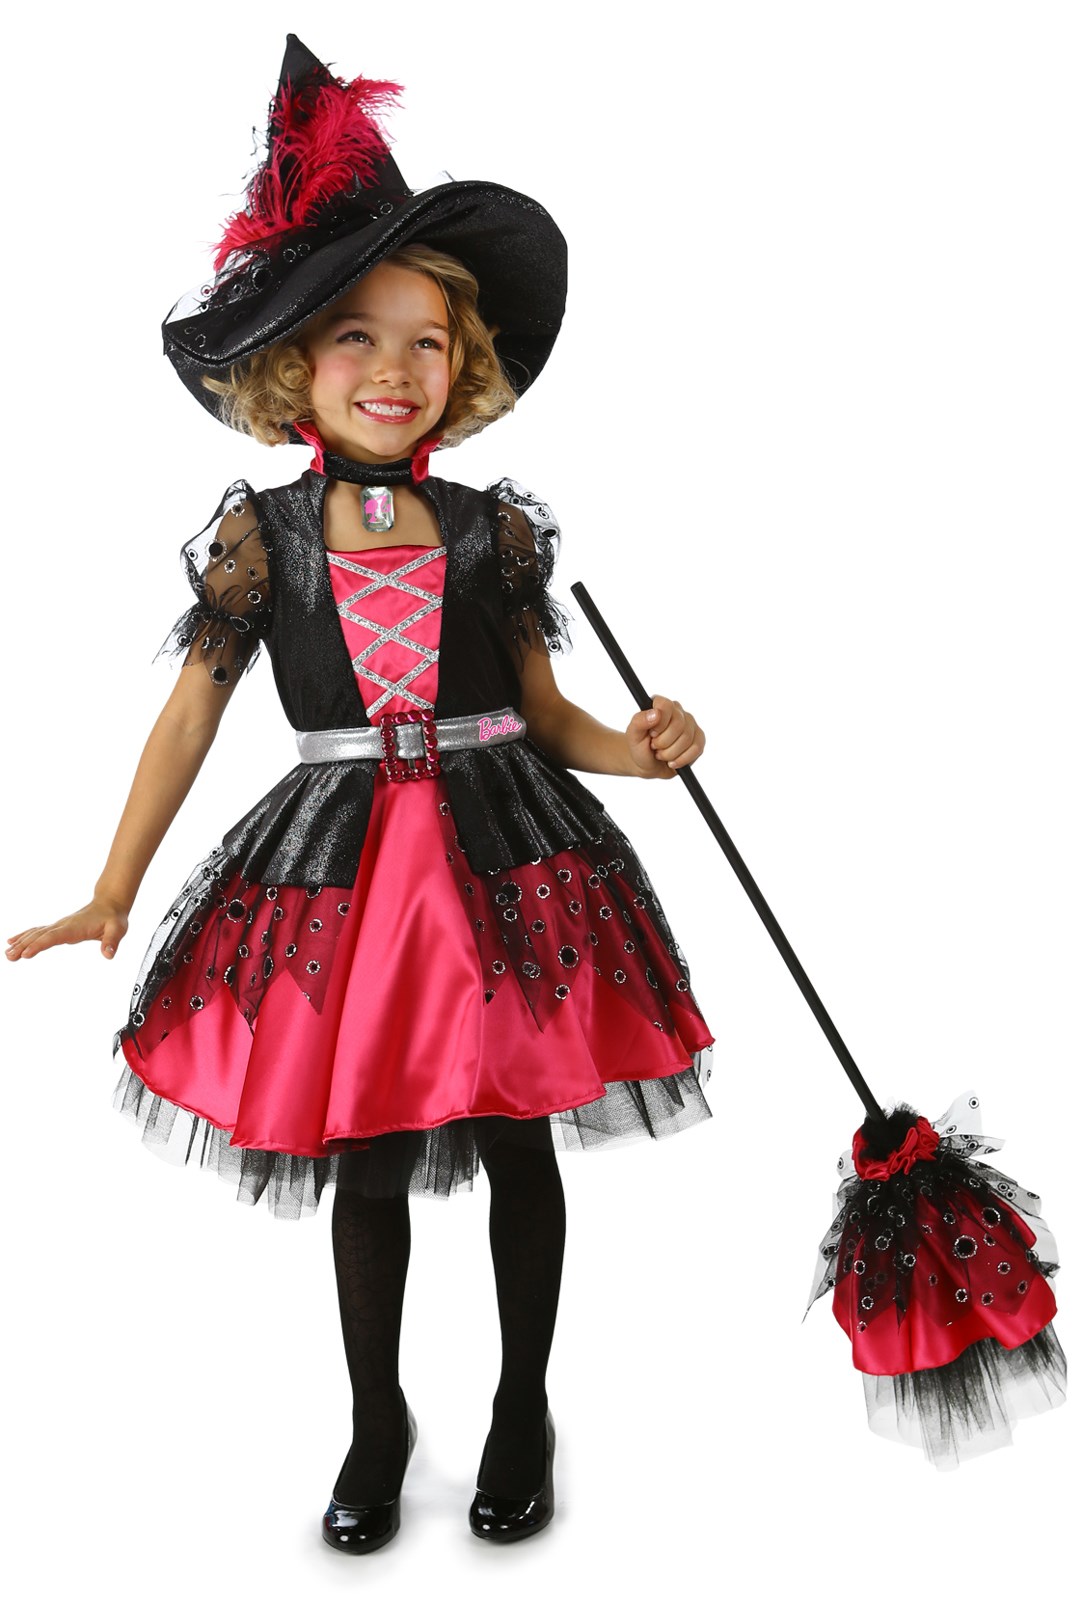 Deluxe Barbie Witch Costume